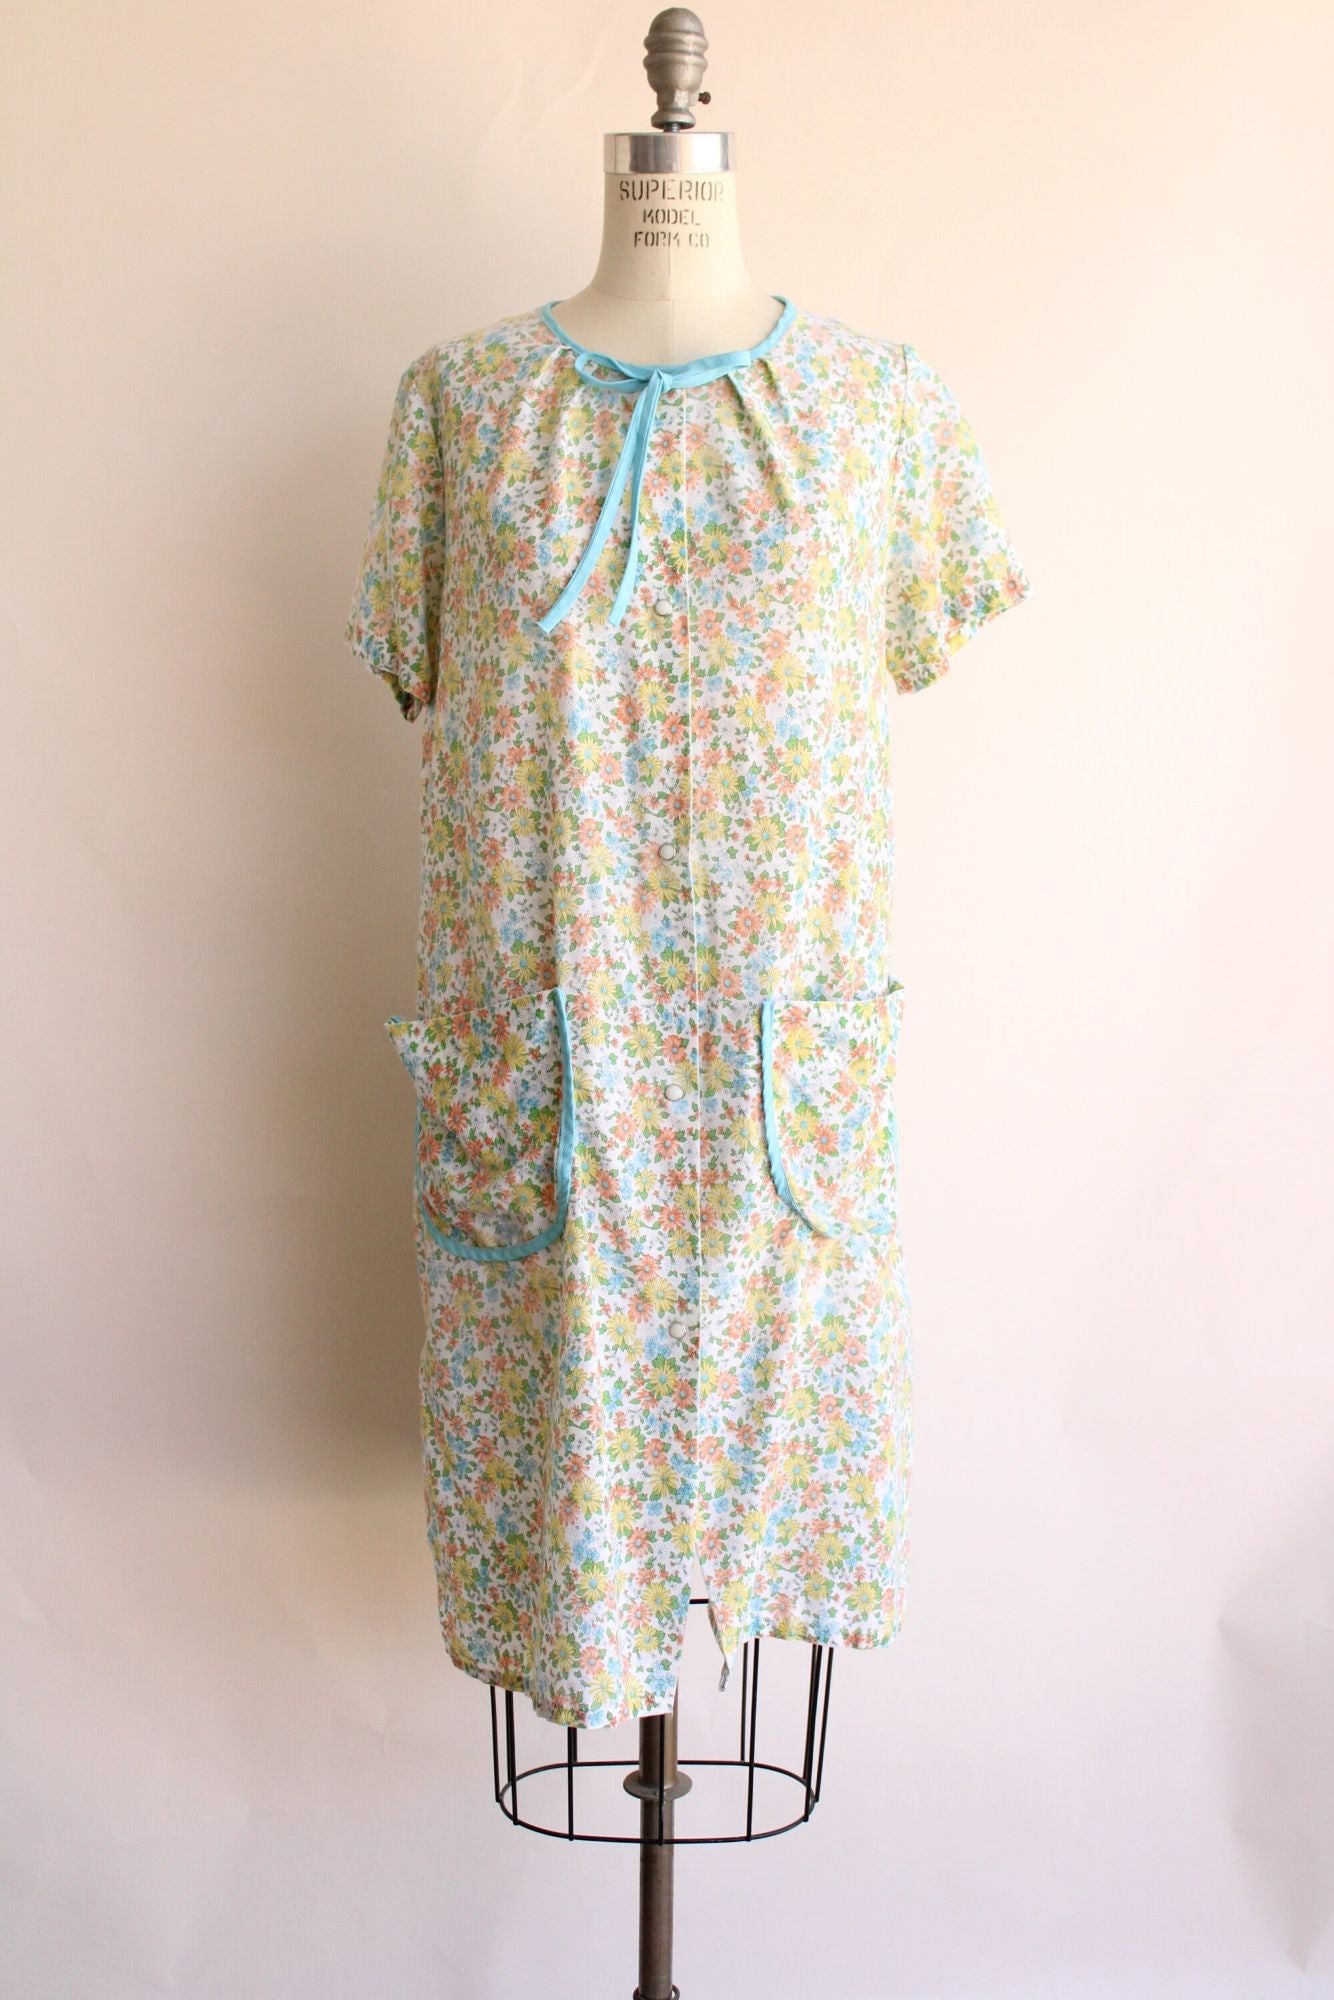 Vintage 1960s 1970s Floral Print Housecoat with Pockets